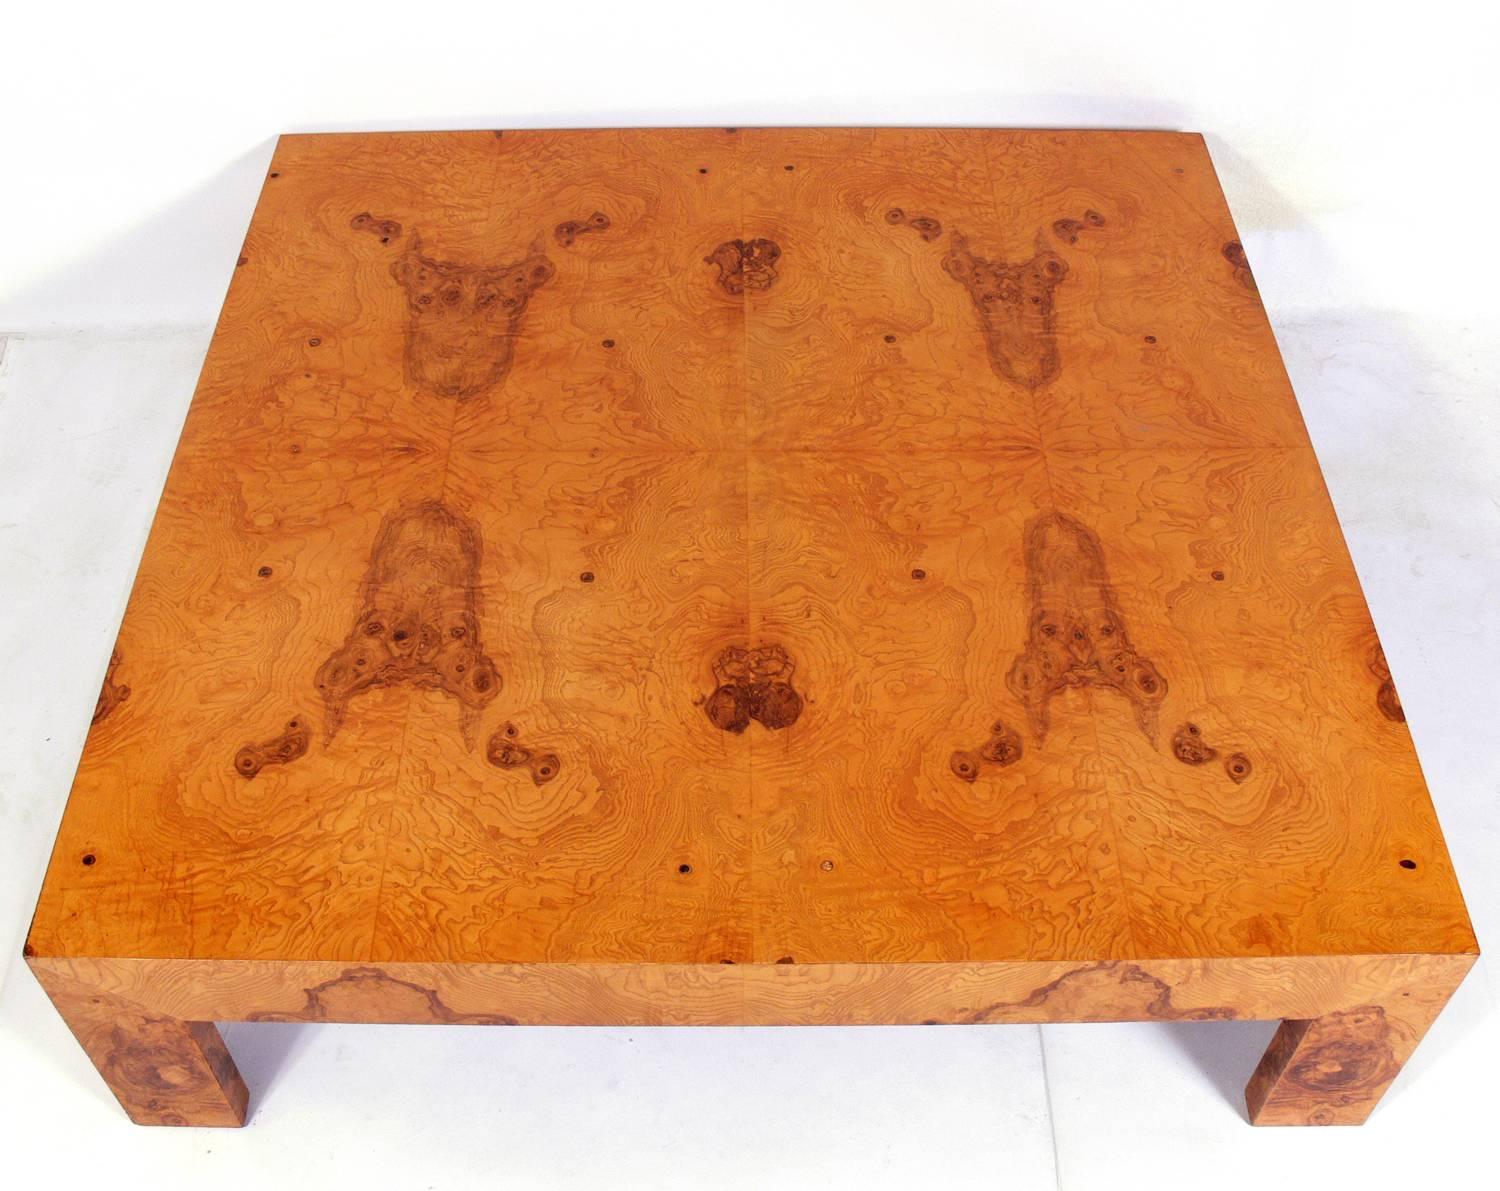 Large-scale burl wood coffee table, designed by Milo Baughman for Thayer Coggin, American, circa 1960s. This large-scale table was made for entertaining and the burled wood graining is beautiful.